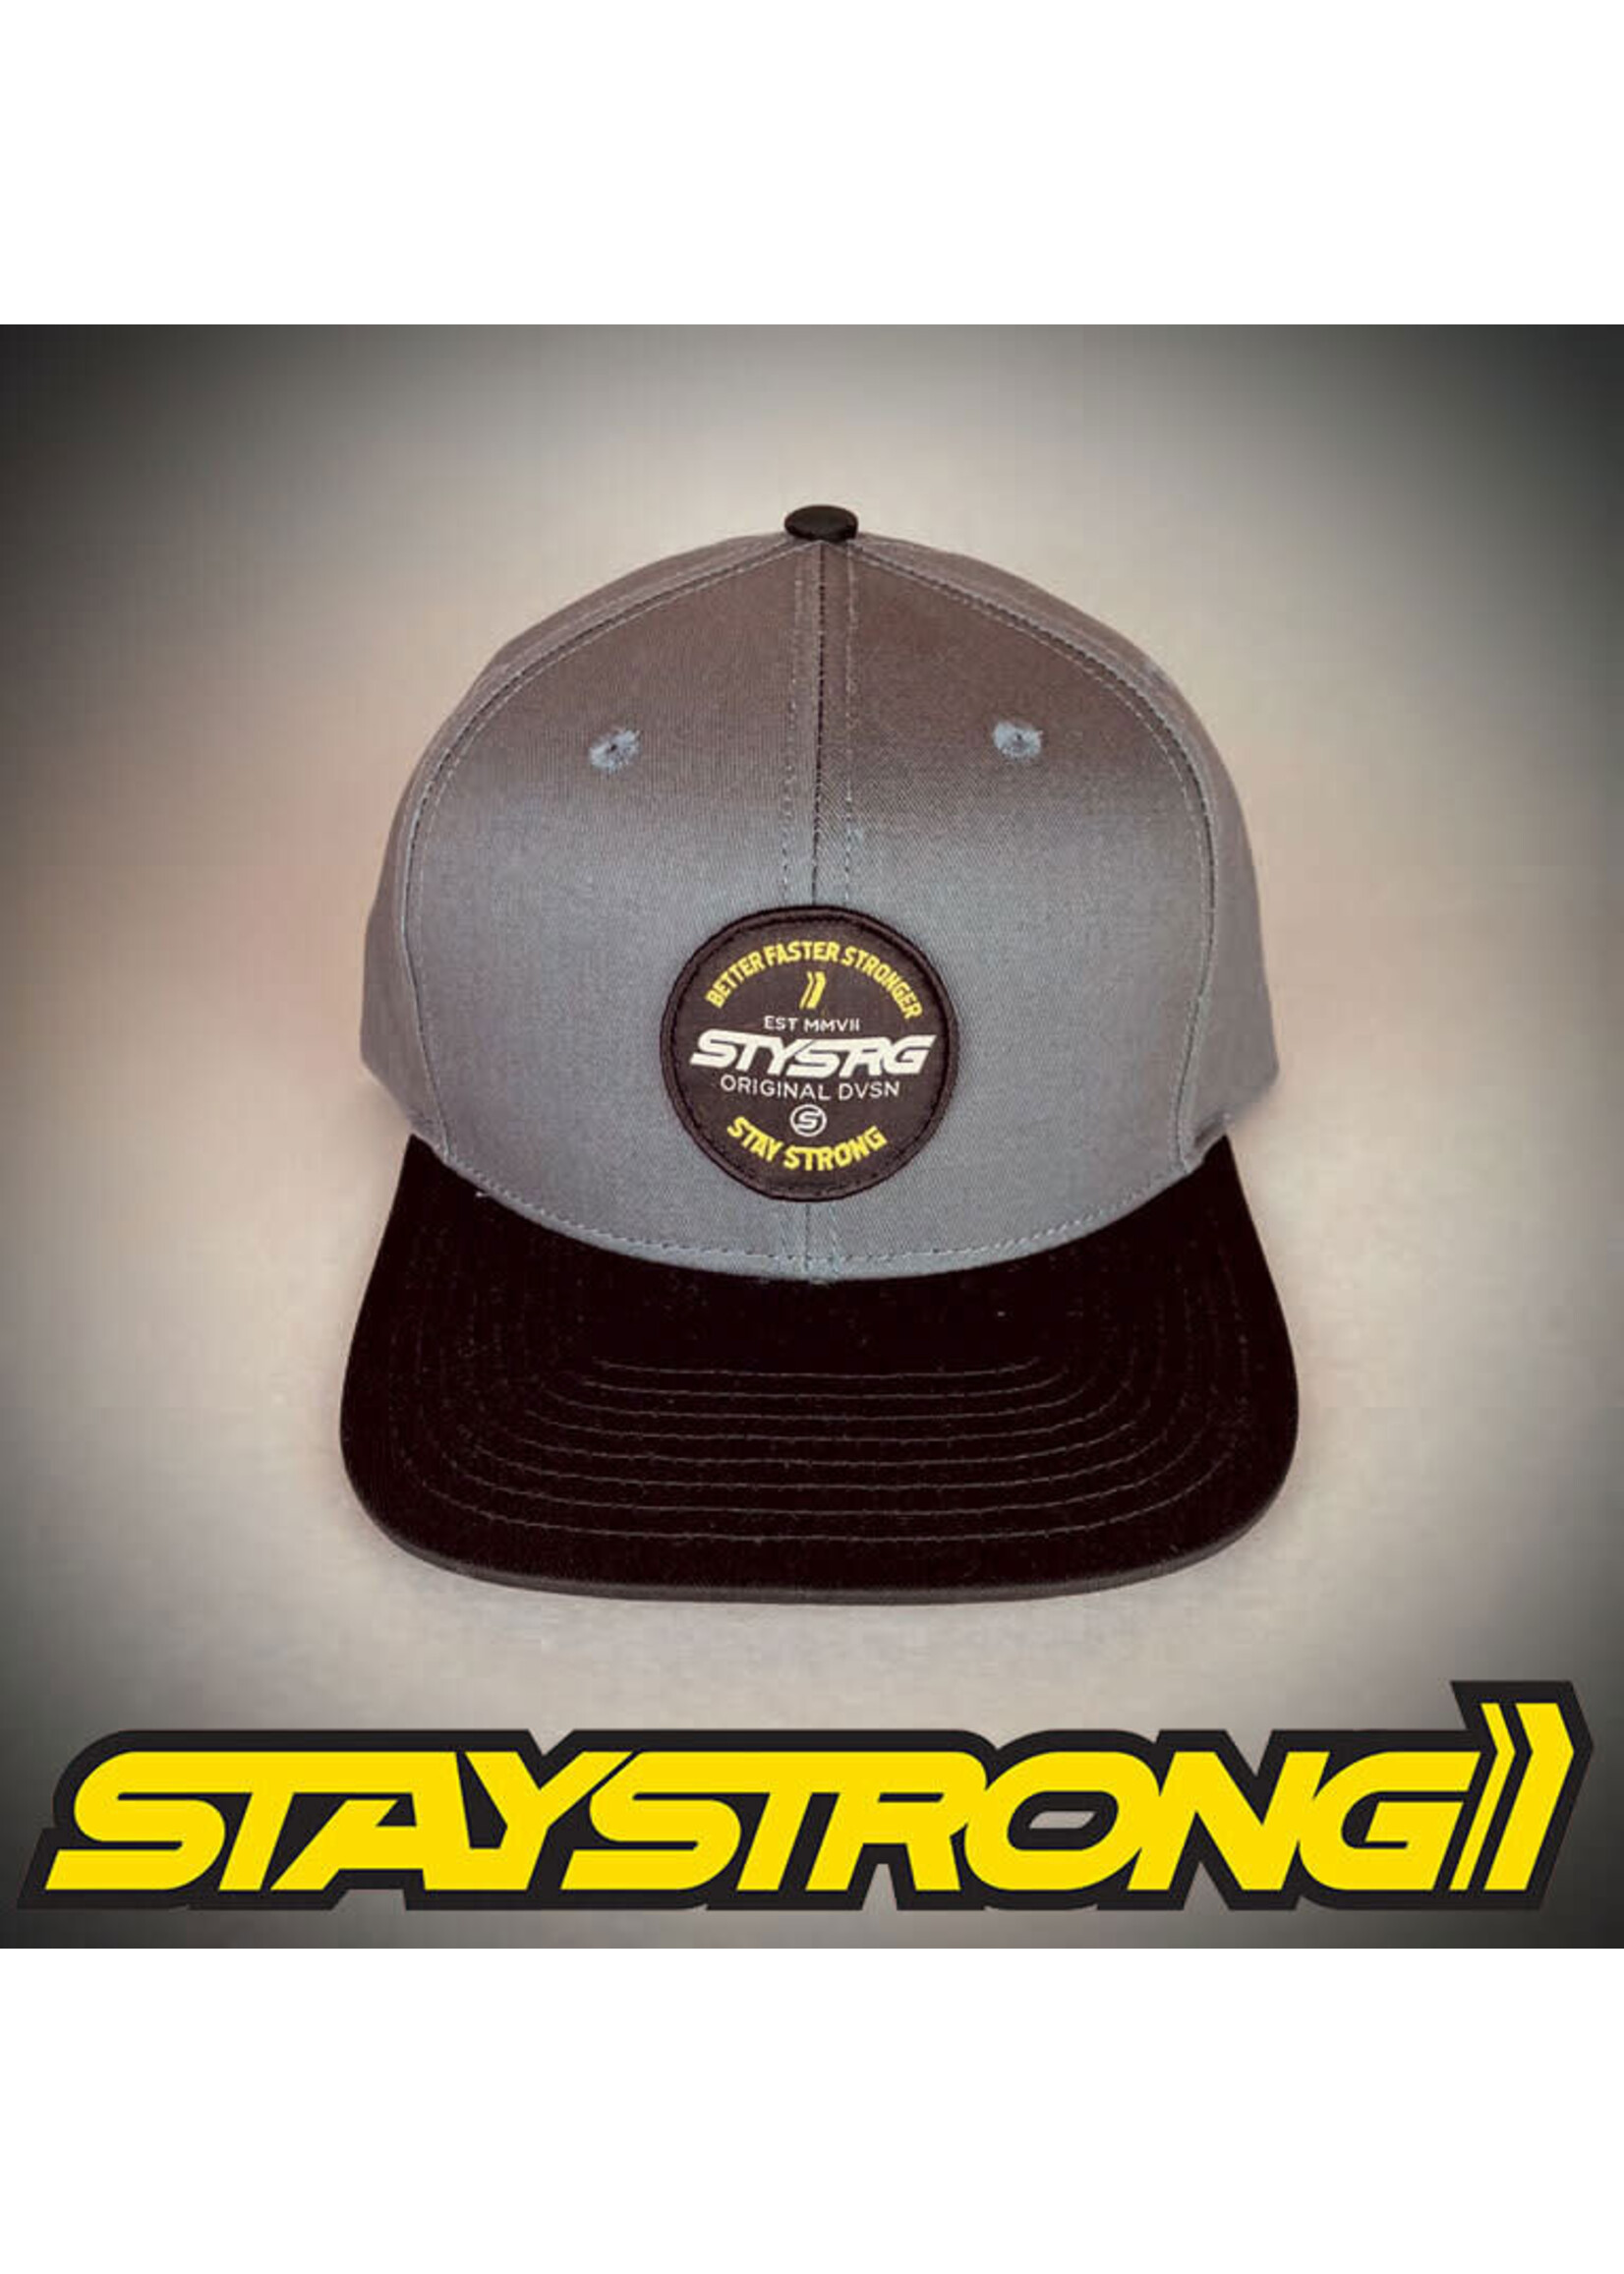 Stay Strong Hat Staystrong Snap Back